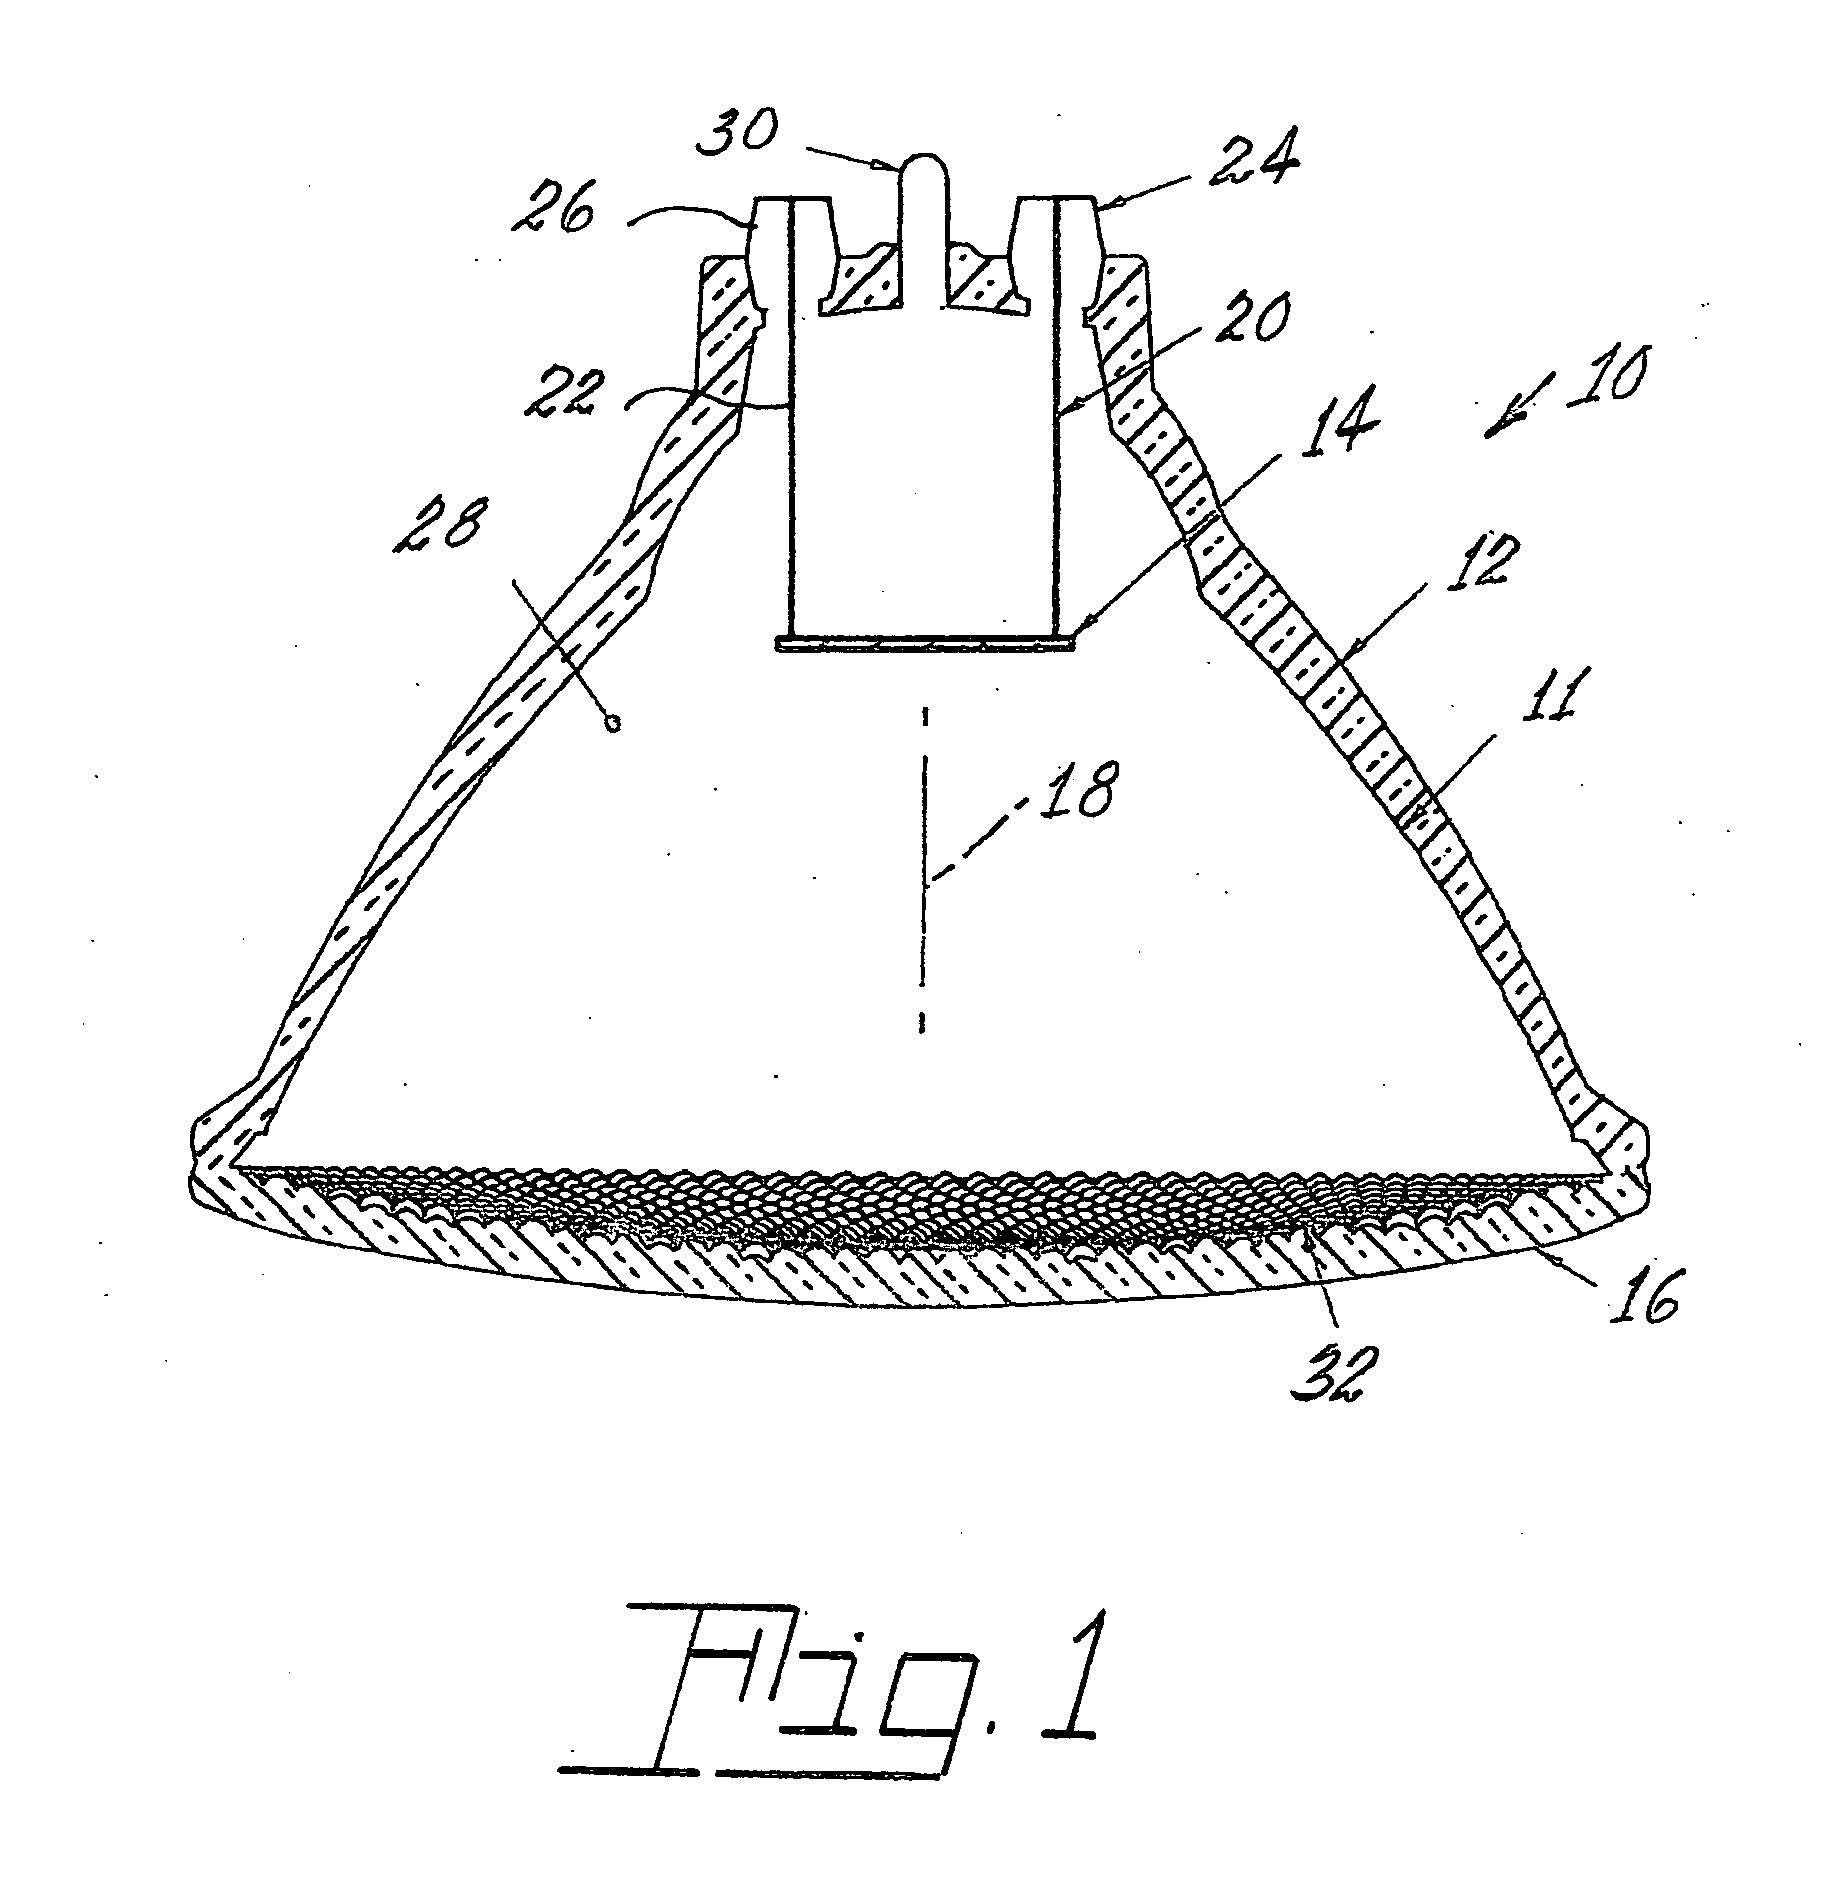 Incandescent reflector heat lamp with uniform irradiance